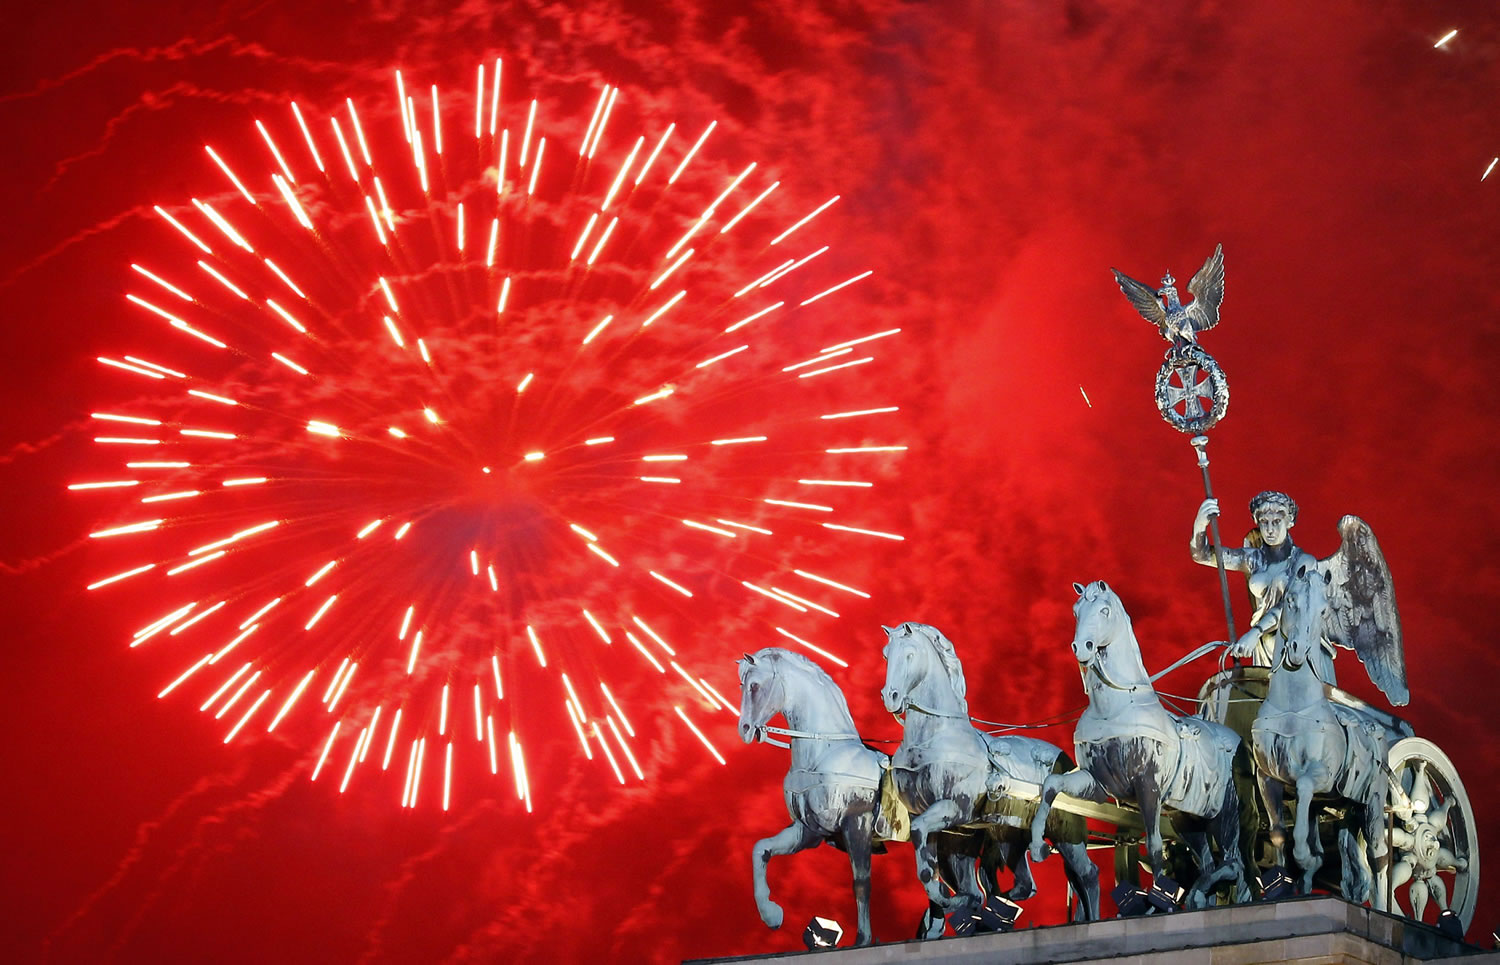 Fireworks light the sky Sunday above the Quadriga at the Brandenburg Gate in Berlin shortly after midnight, greeting the New Year, Sunday.